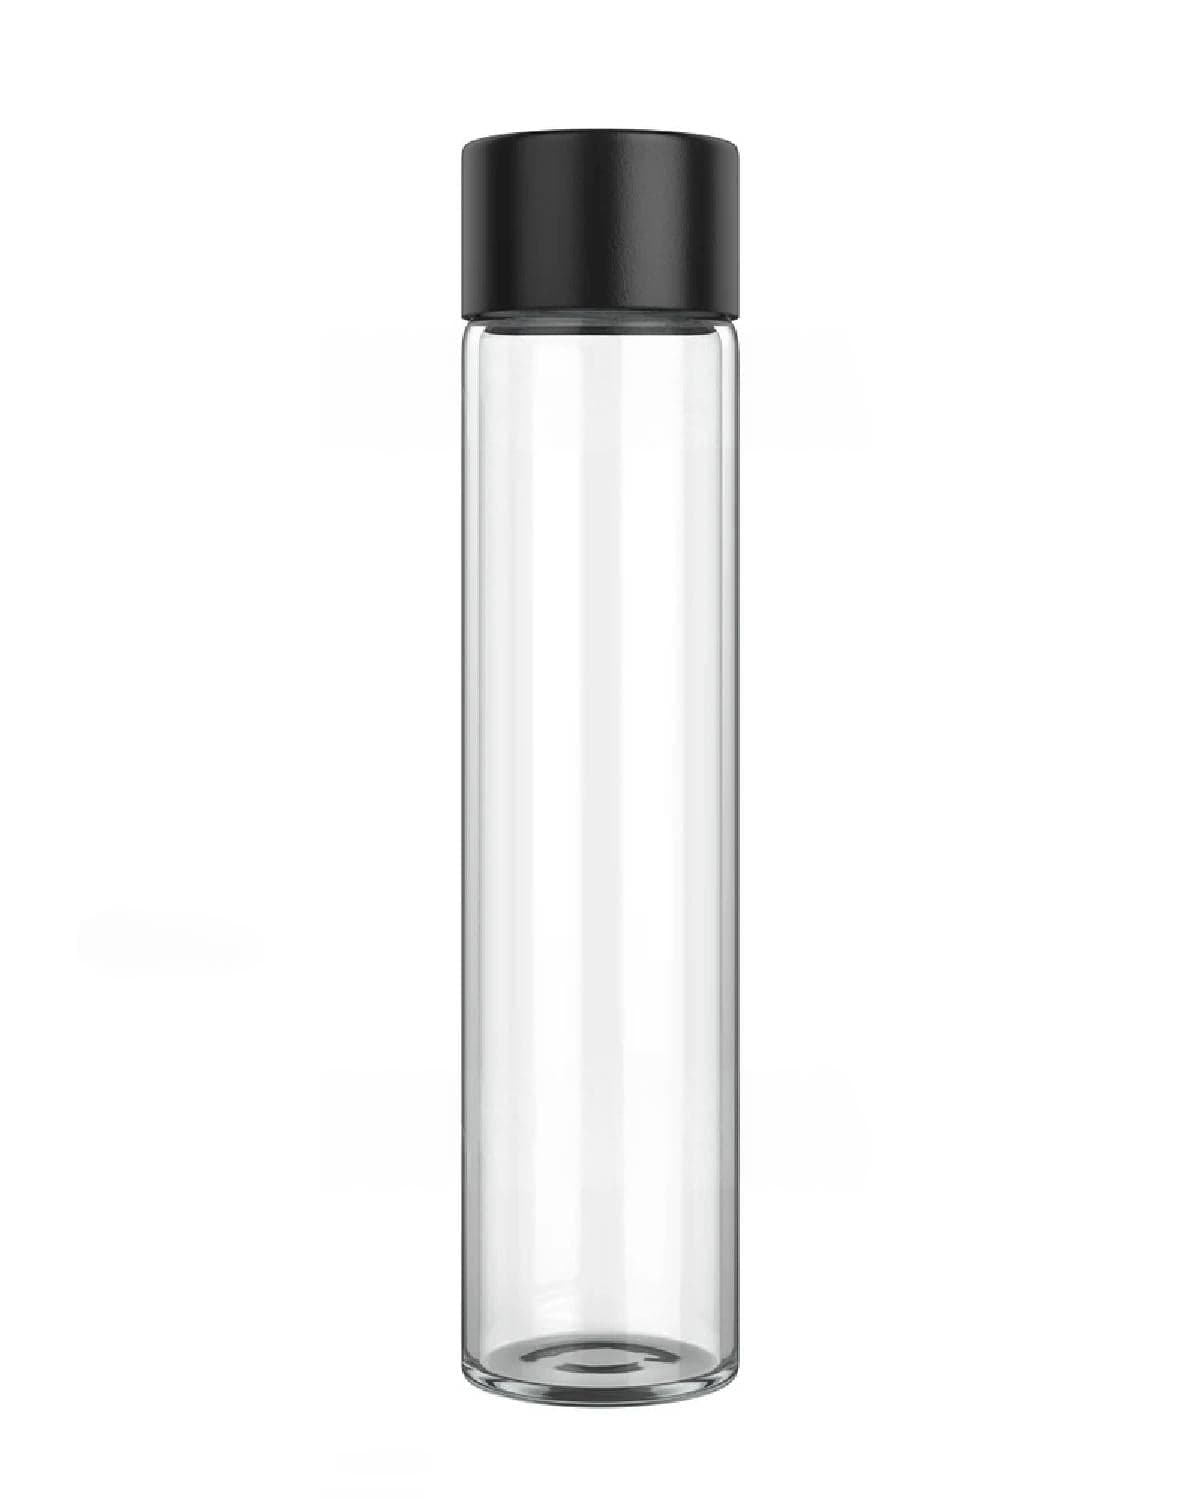 Glass Wide Body Child Resistant Pre-Roll Tube | 120 mm With Black Cap / Single Unit